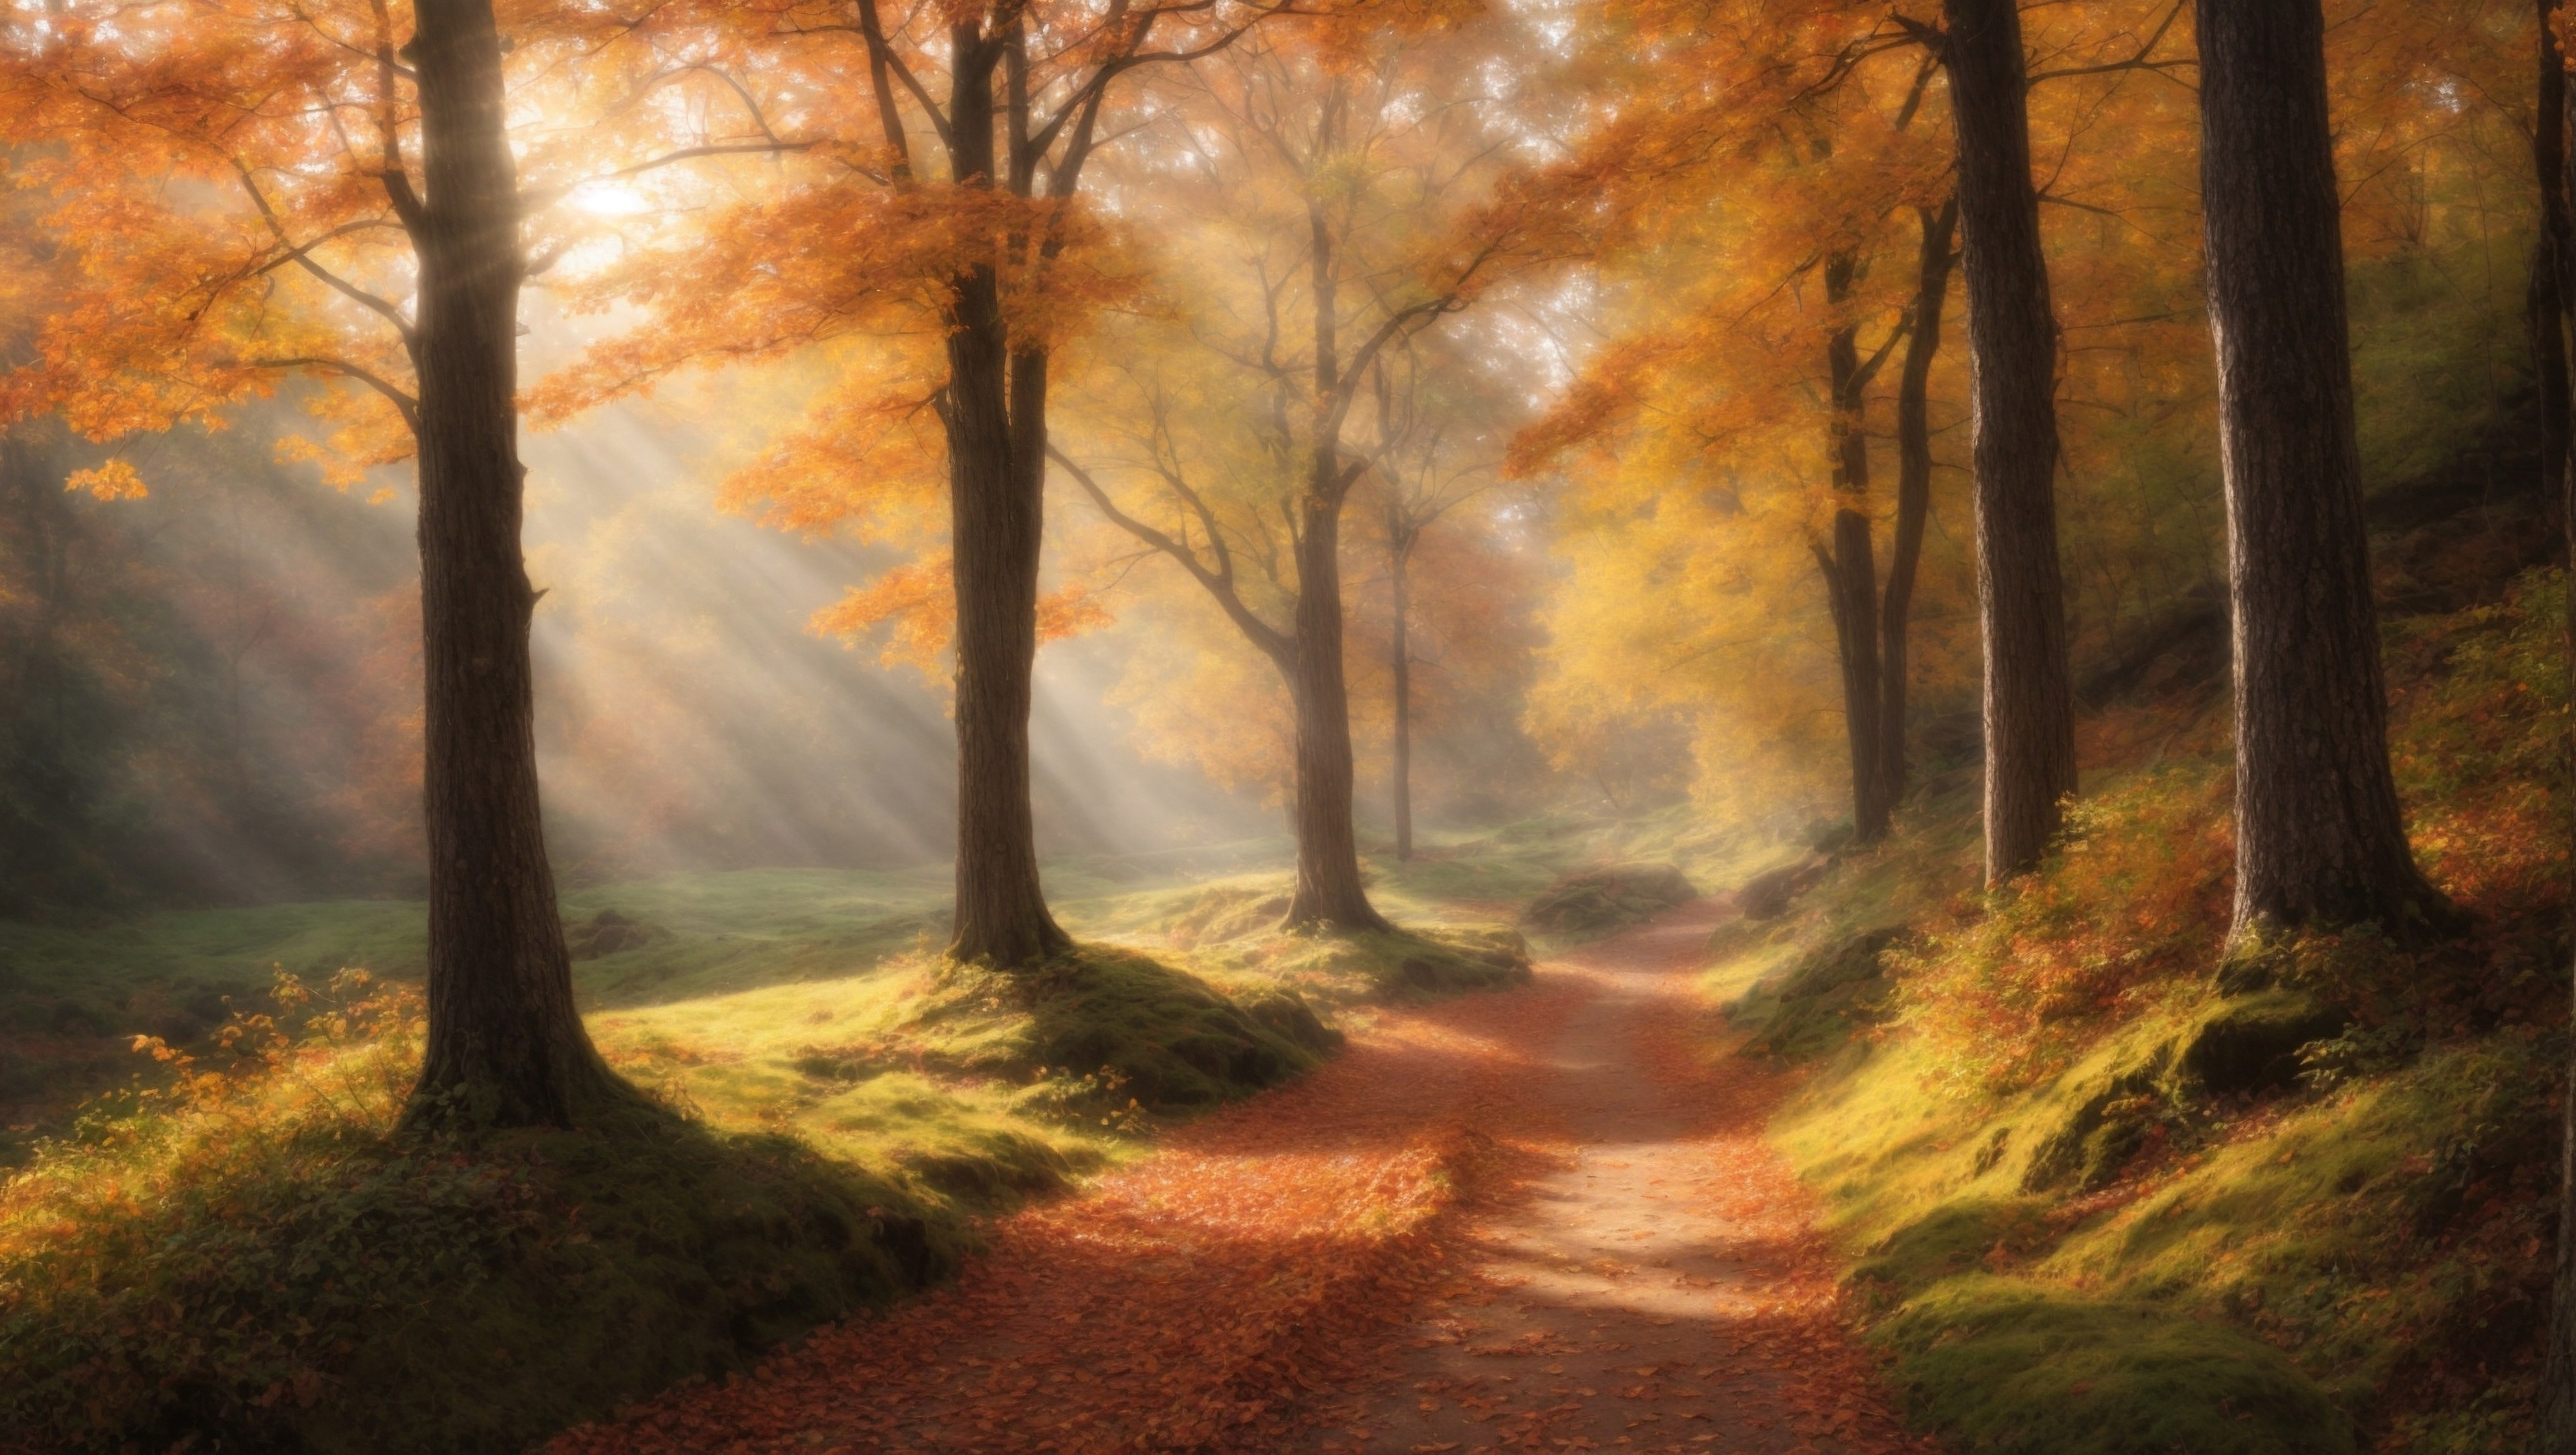 This is an autumn scene with sunbeams on the trees